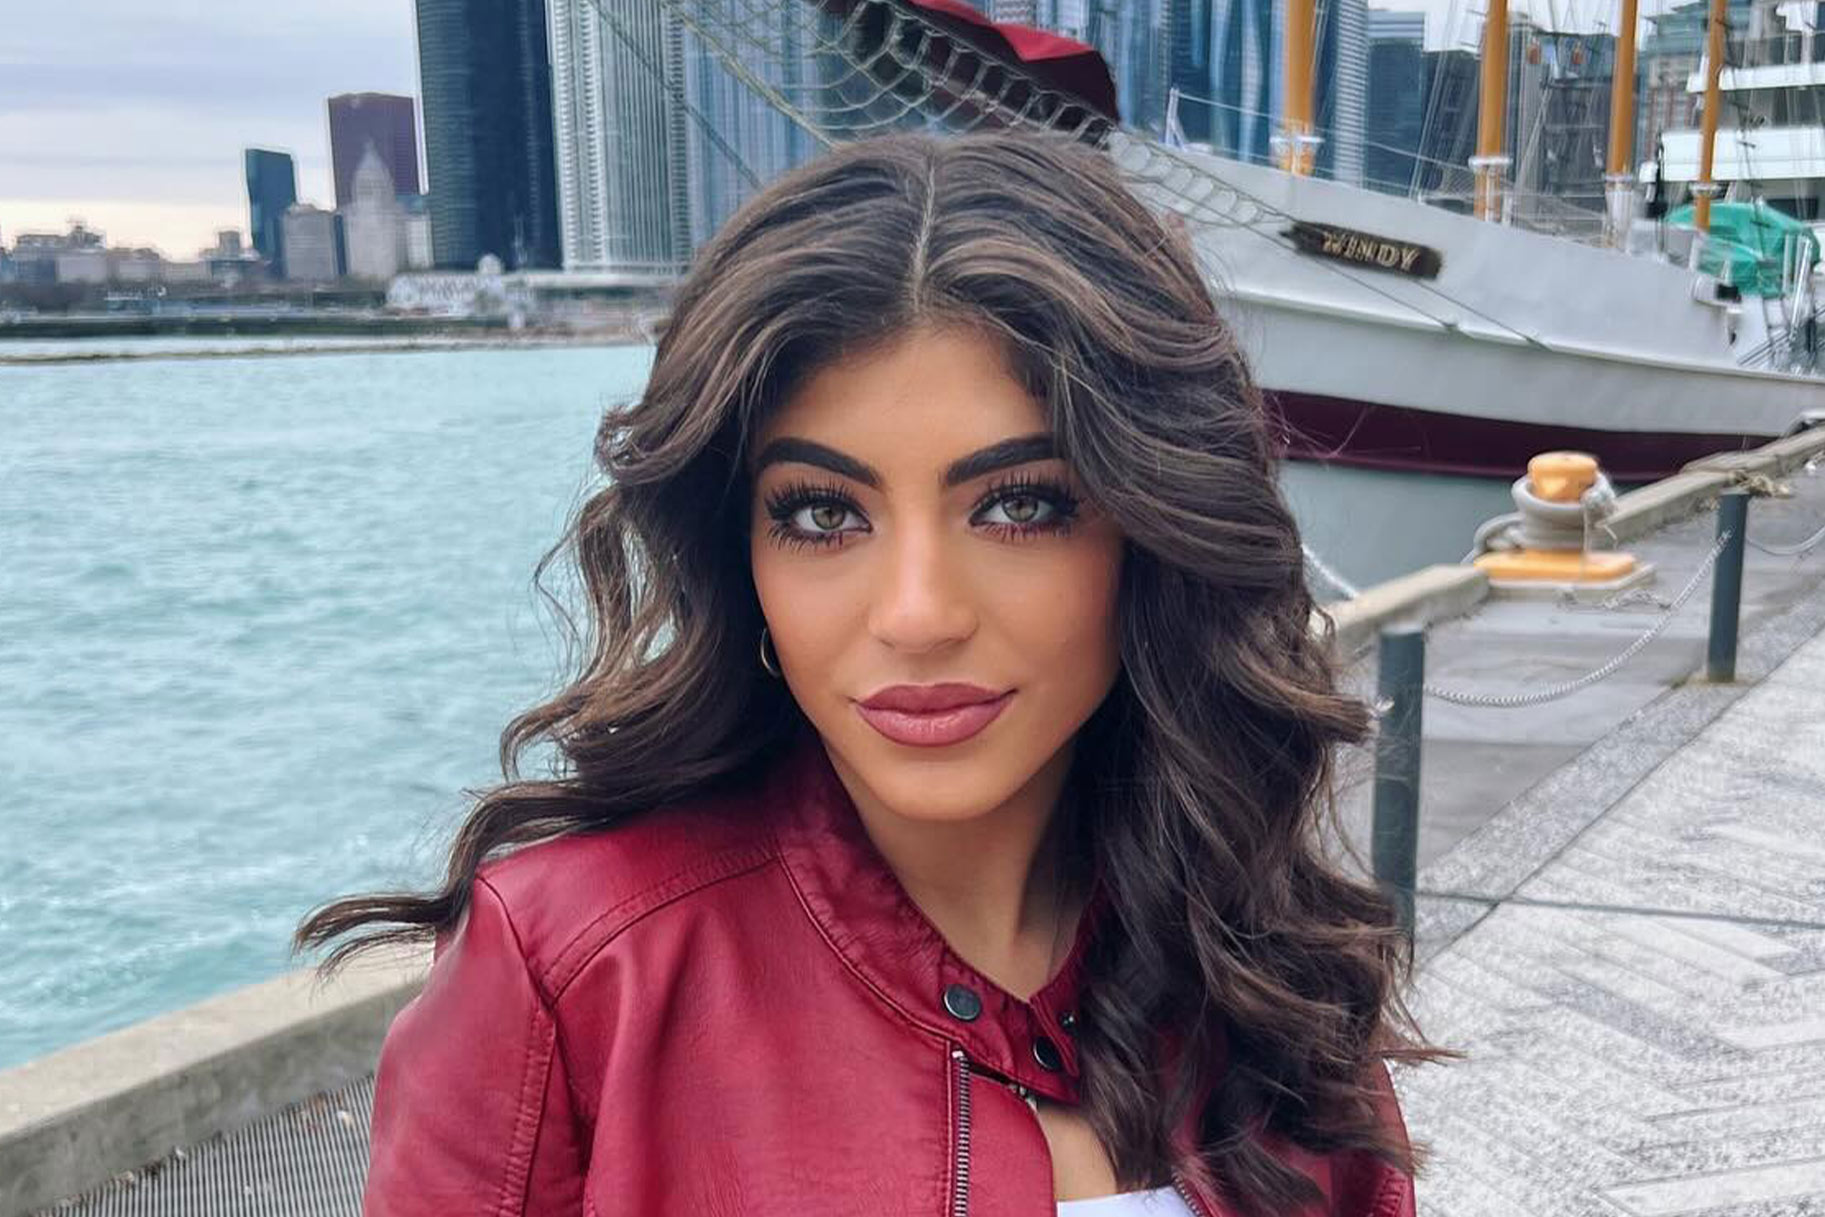 Milania Giudice posing on a pier in front of a boat.